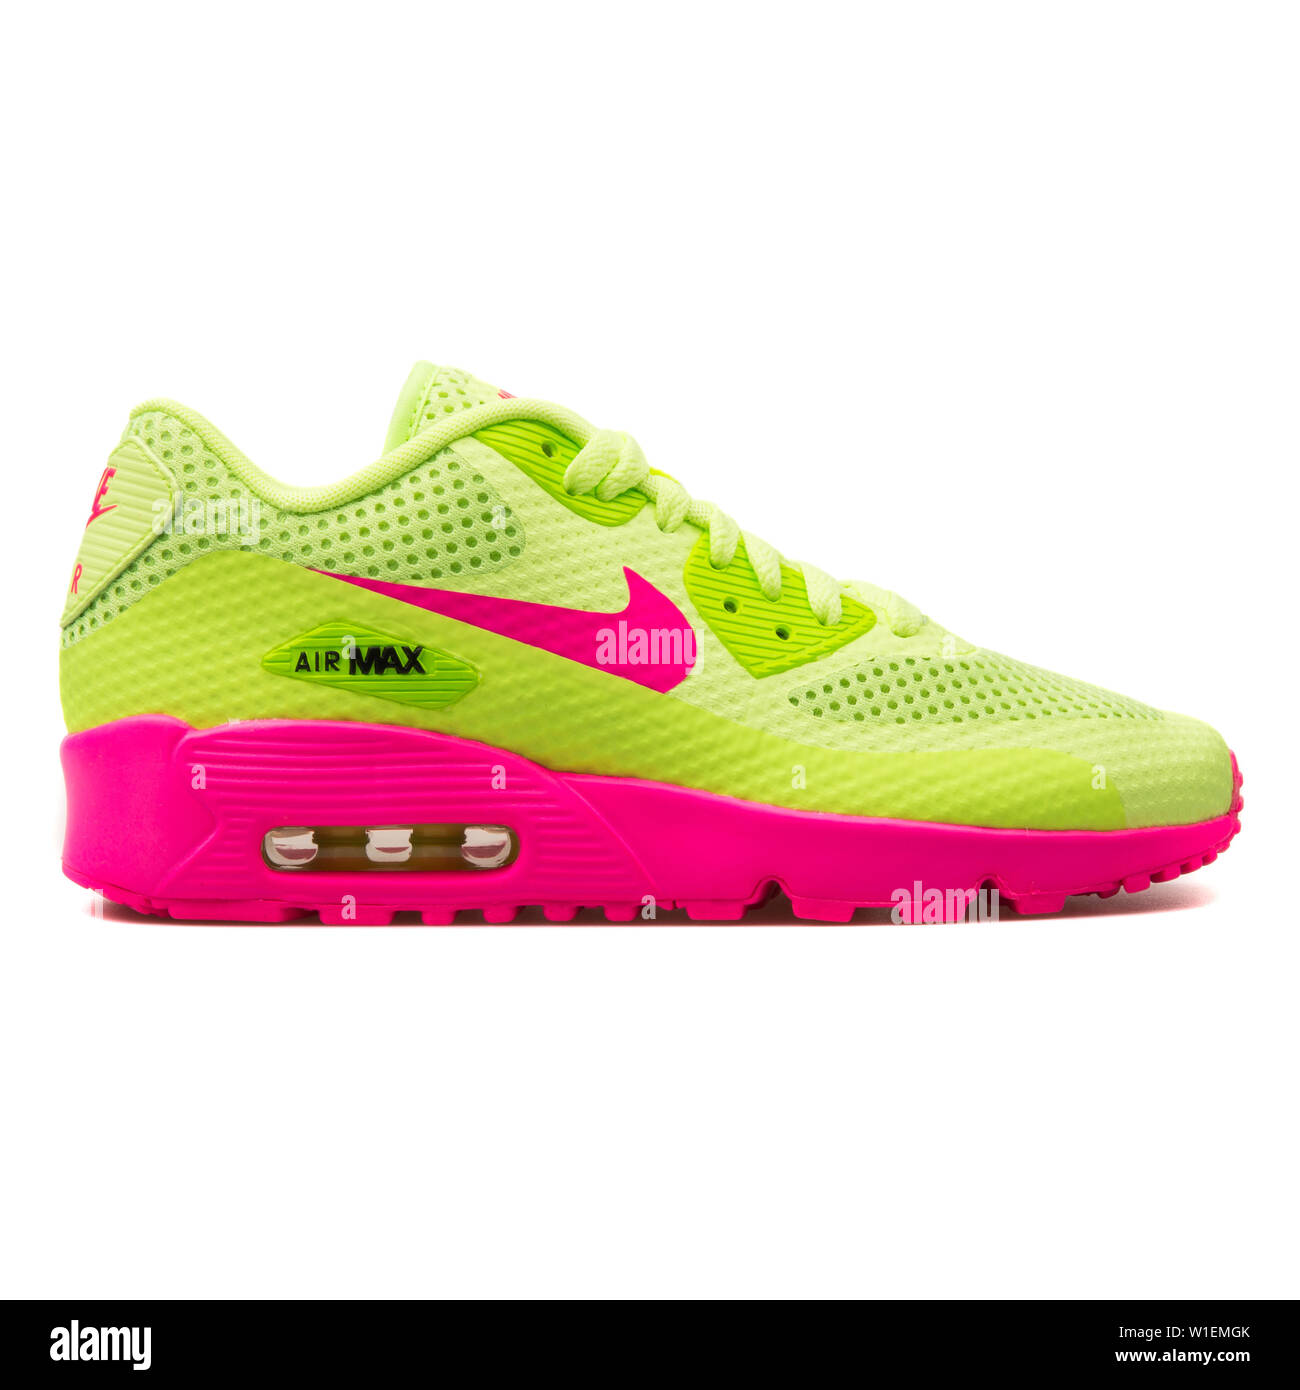 VIENNA, AUSTRIA - AUGUST 30, 2017: Nike Air Max 90 BR green and pink sneaker on white background. Stock Photo